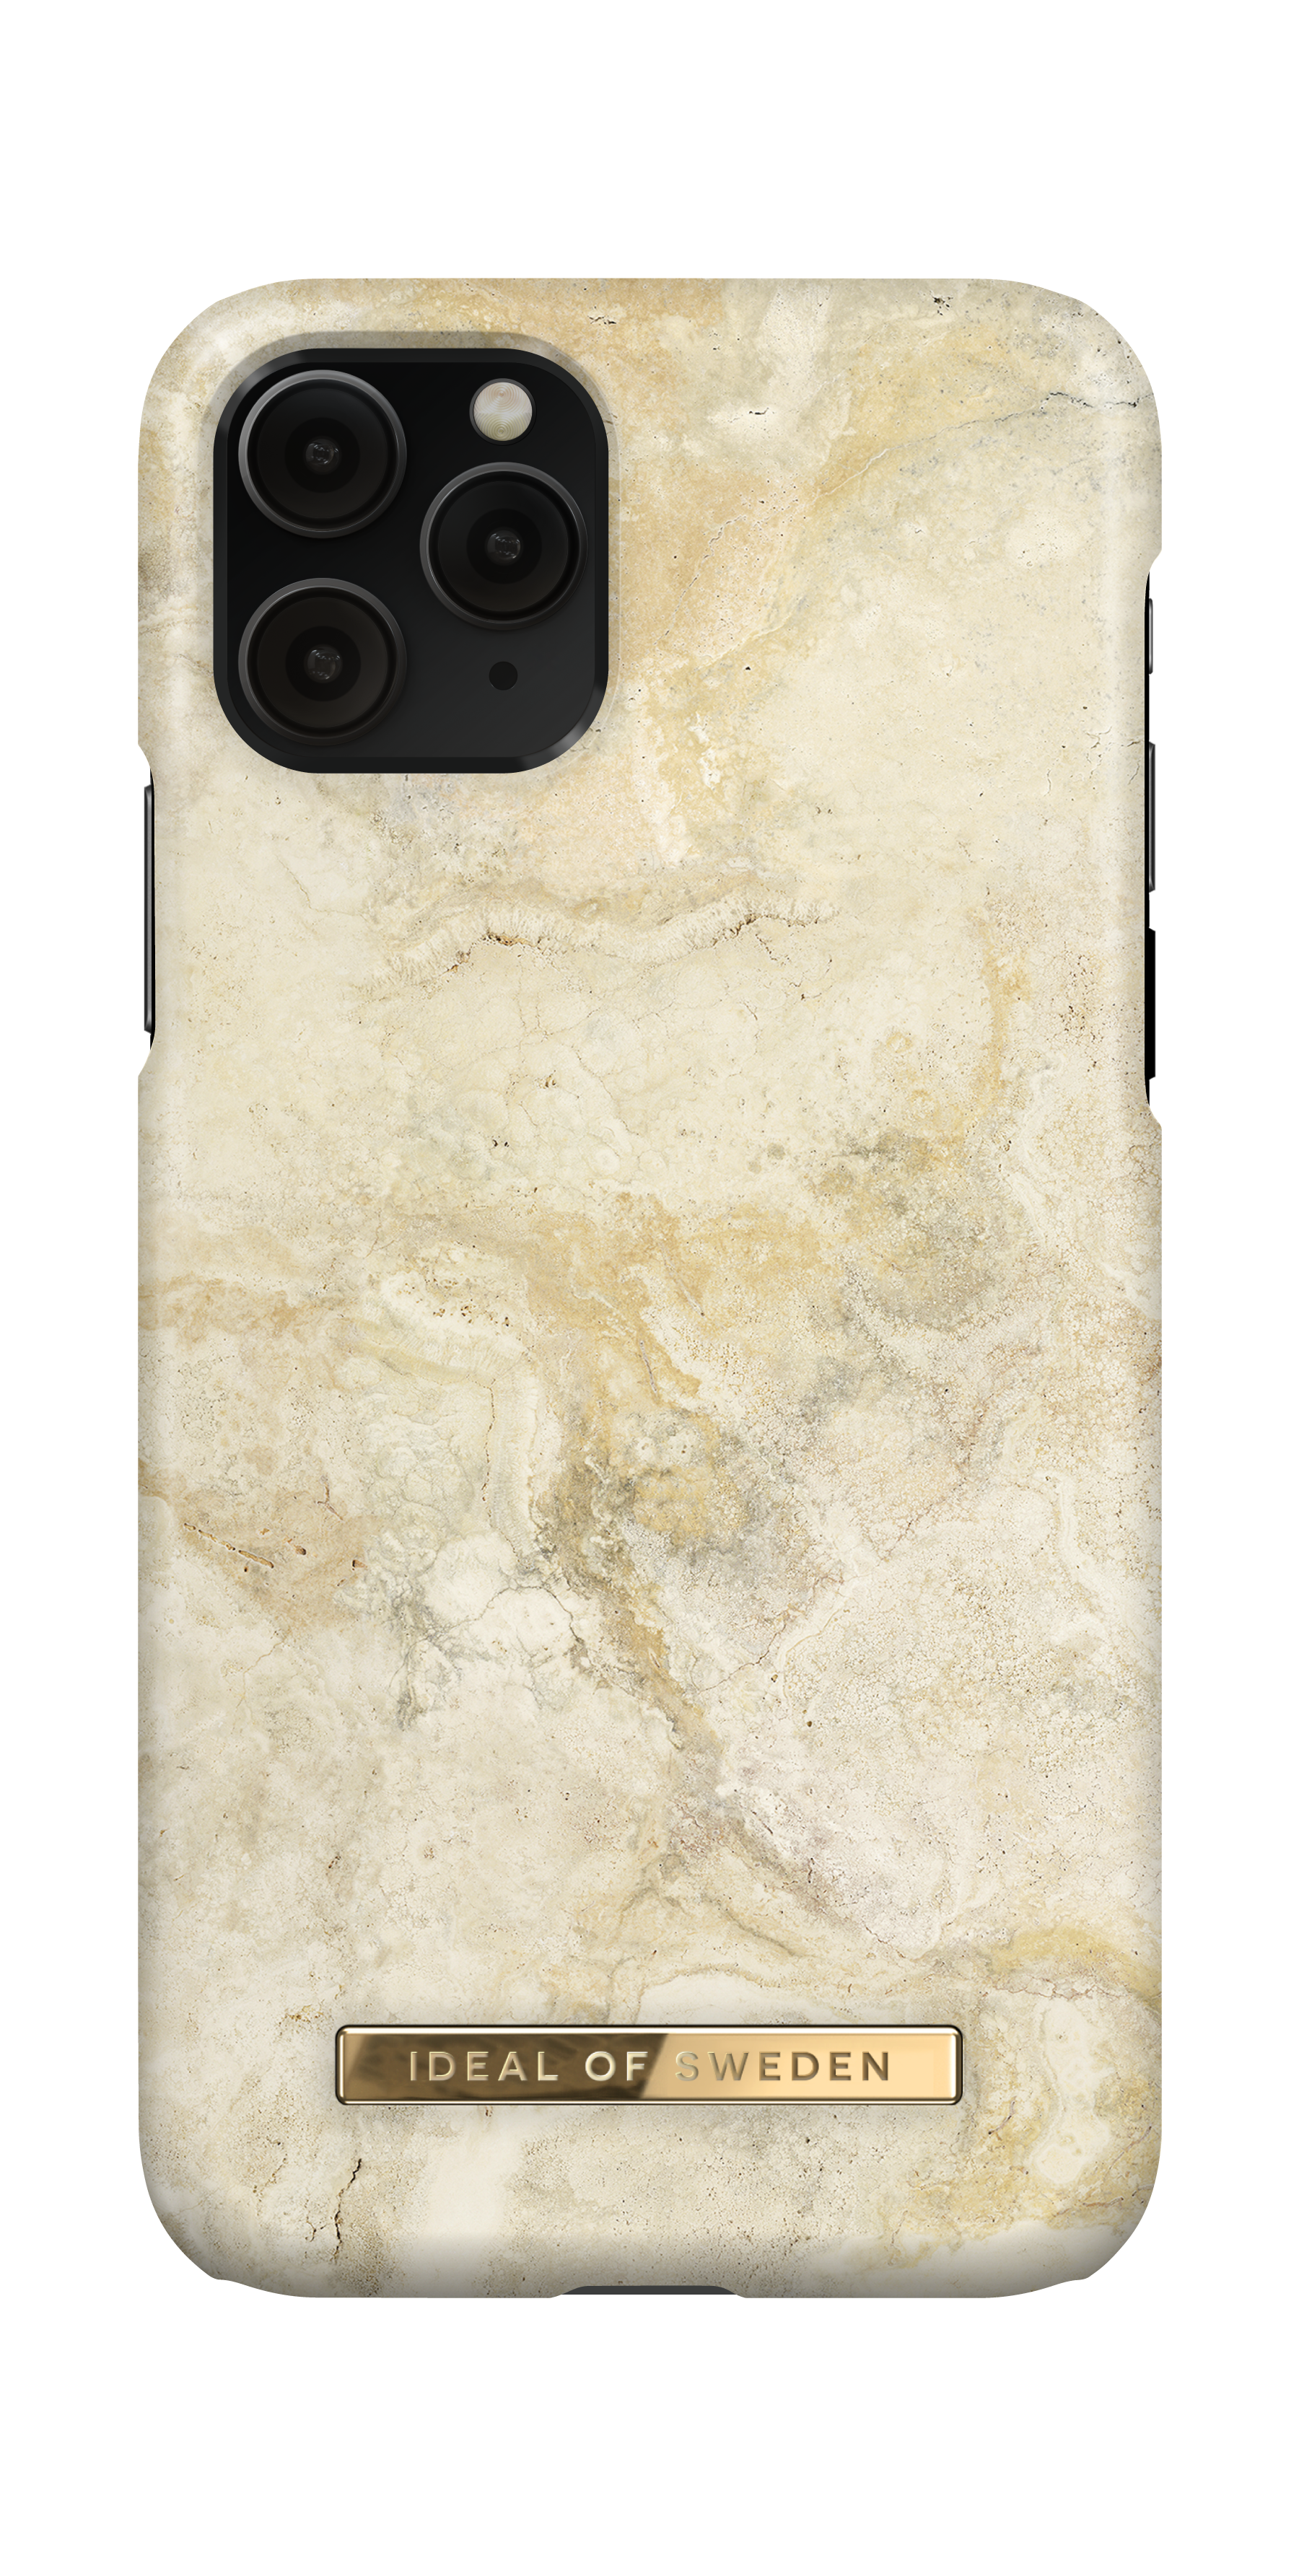 SWEDEN OF Apple, iPhone iPhone Sandstorm IDFCSS20-I1958-195, X, iPhone 11 XS, Pro, Marble Backcover, IDEAL